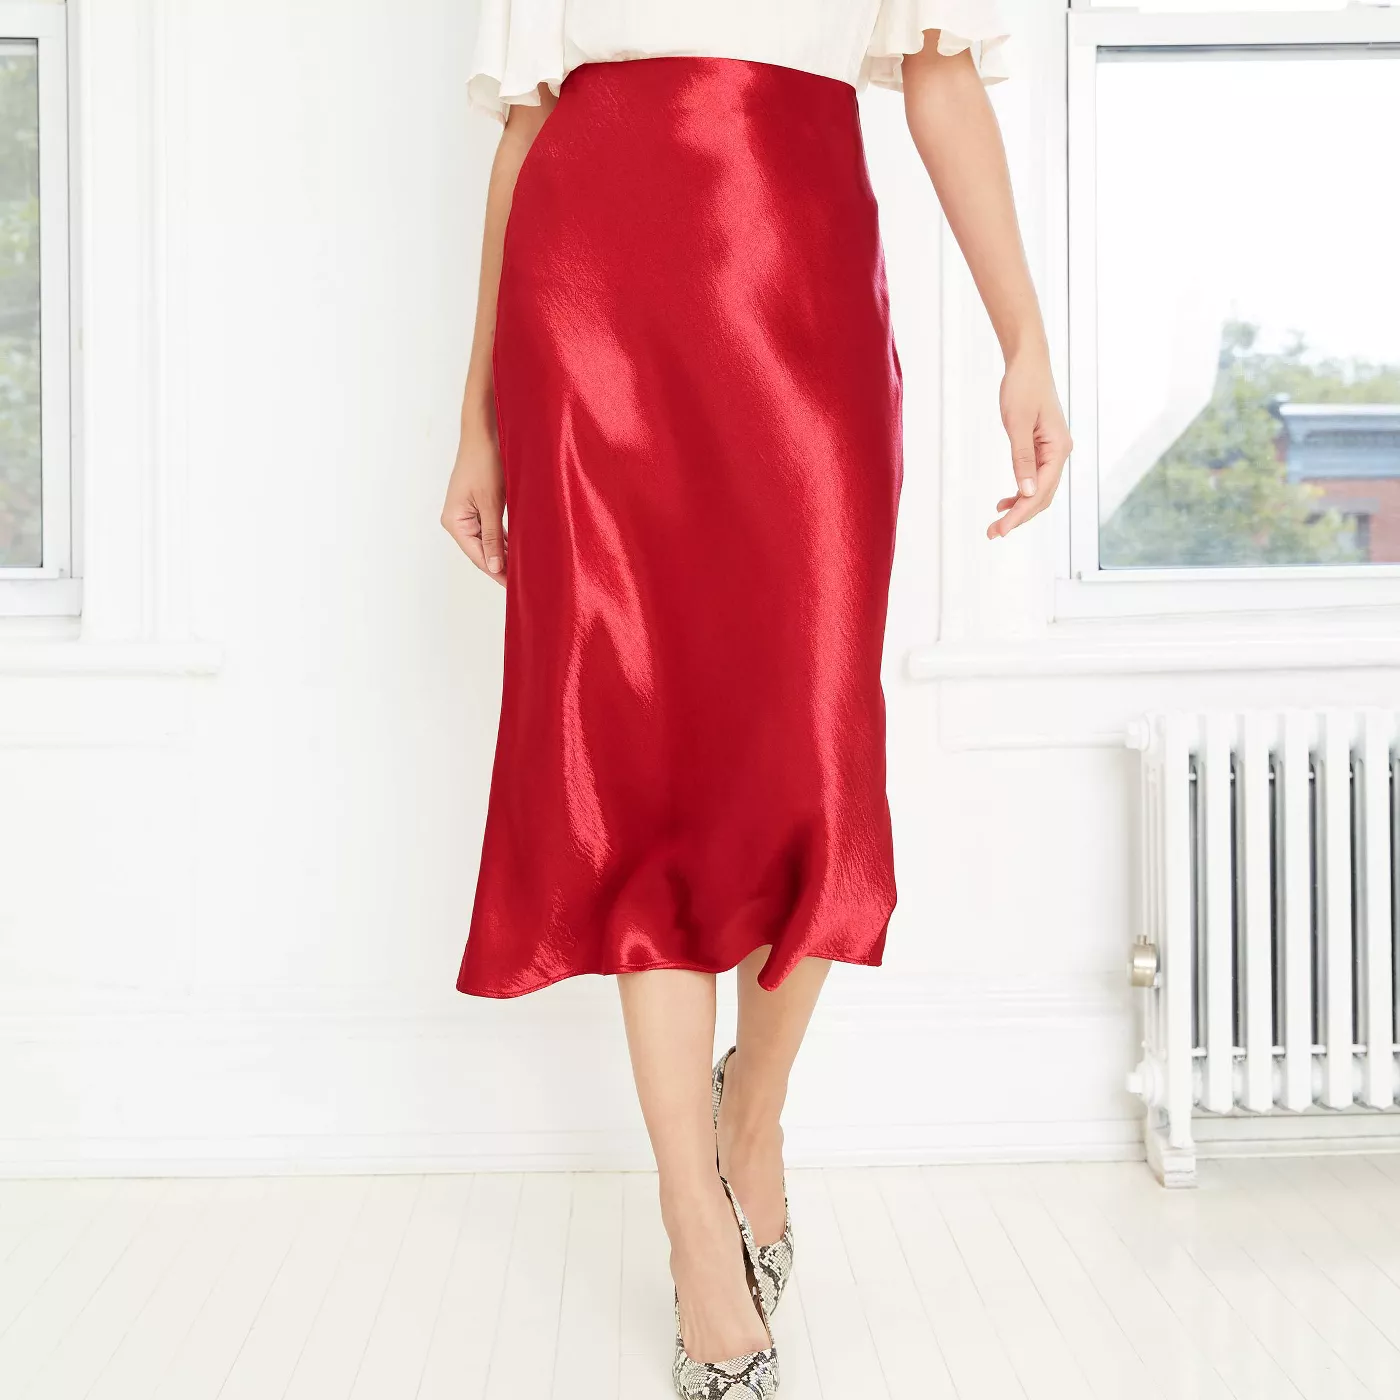 Women's Slip A-Line Maxi Skirt - A New Day™ - image 1 of 6